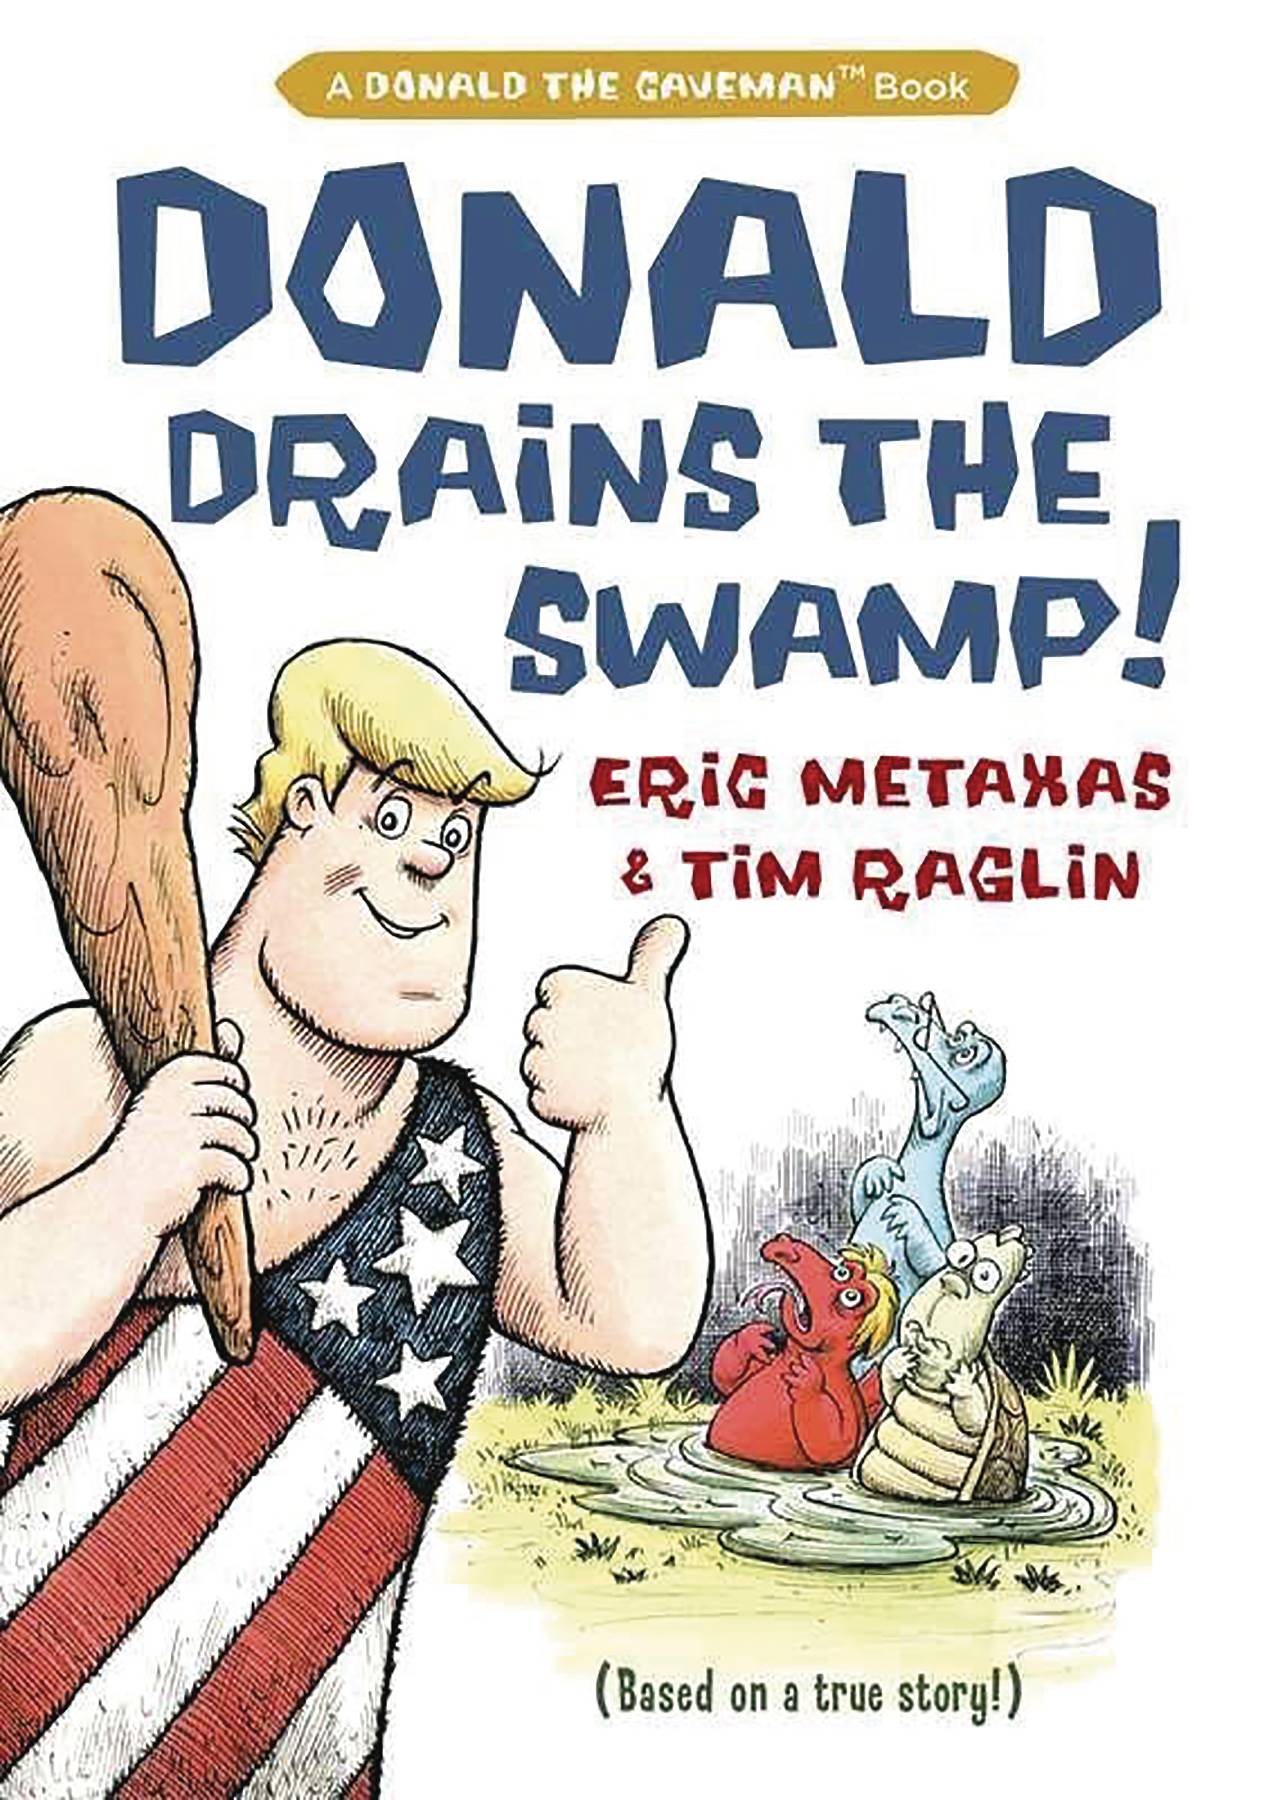 Donald Drains The Swamp Hardcover